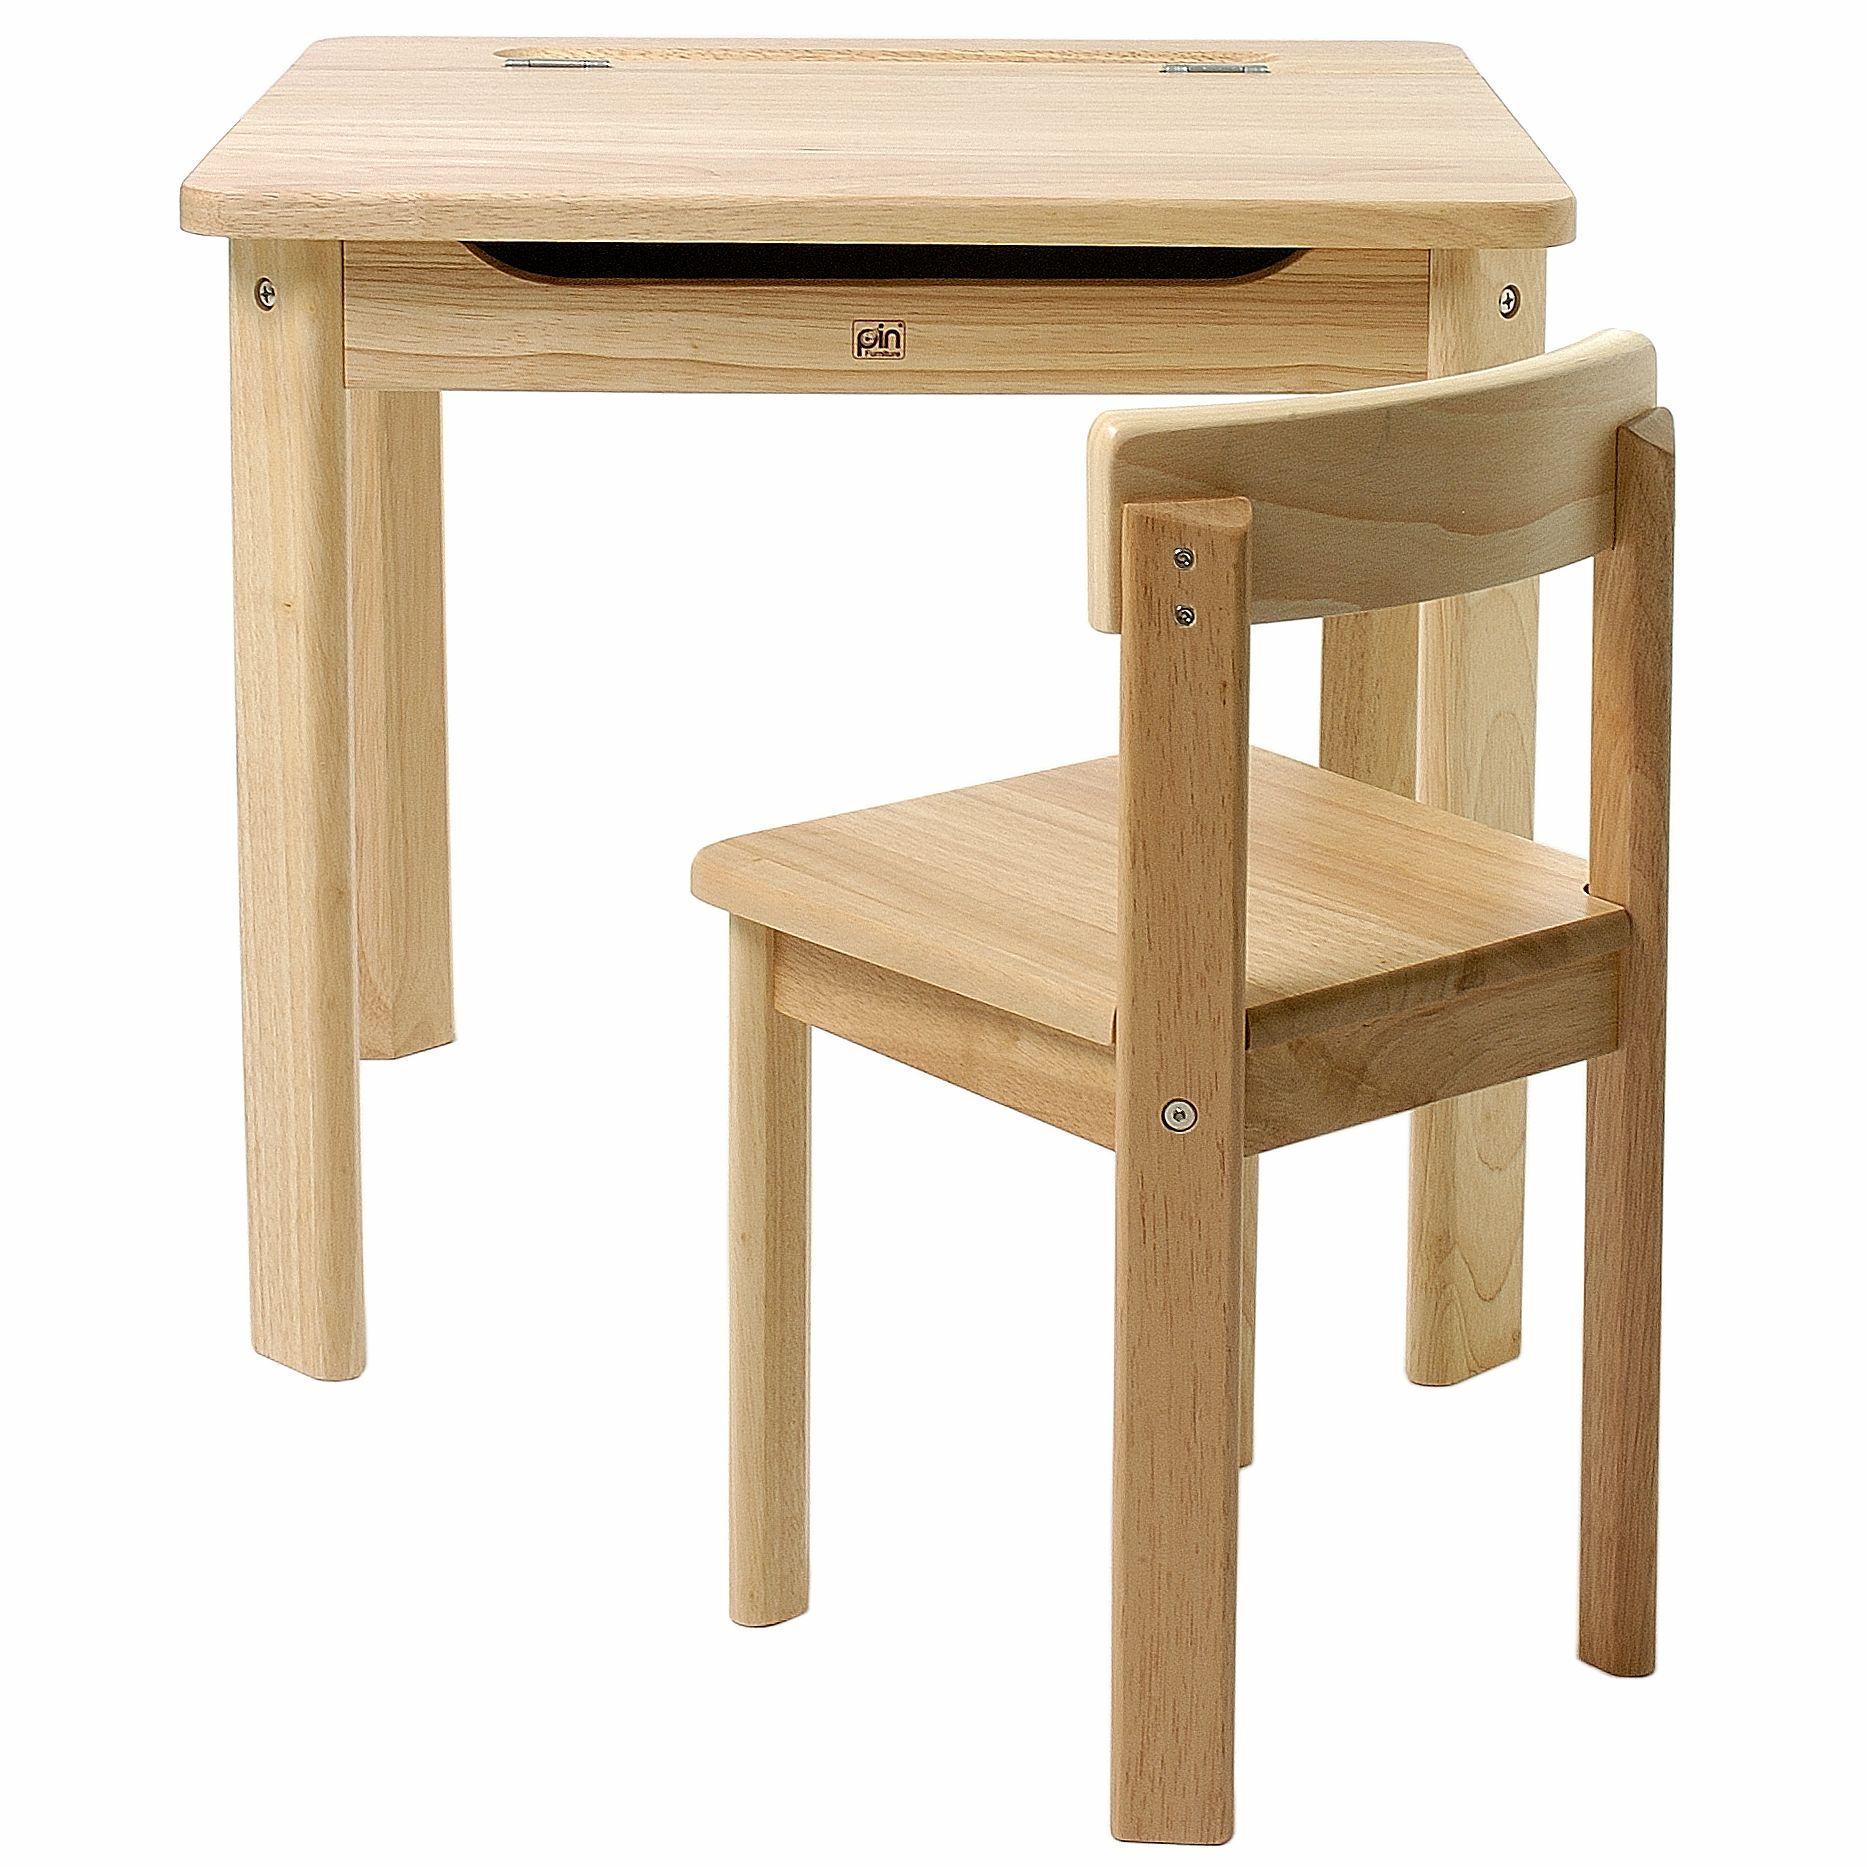 John Lewis Wooden Desk and Chair